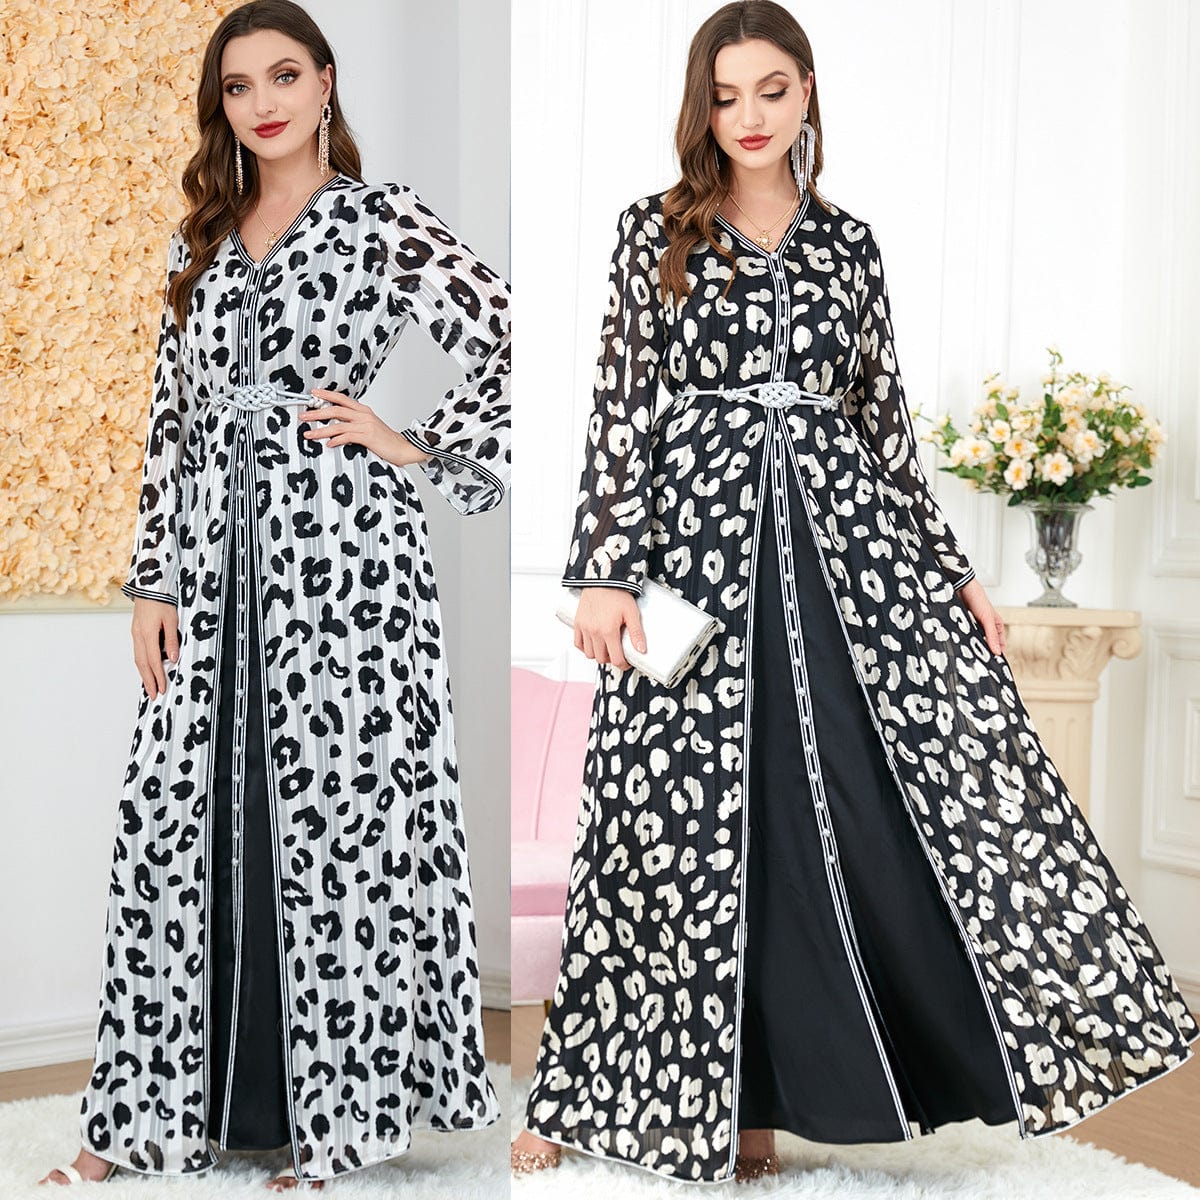 double view of a woman wearing a women's fashion personality two piece set front full length view